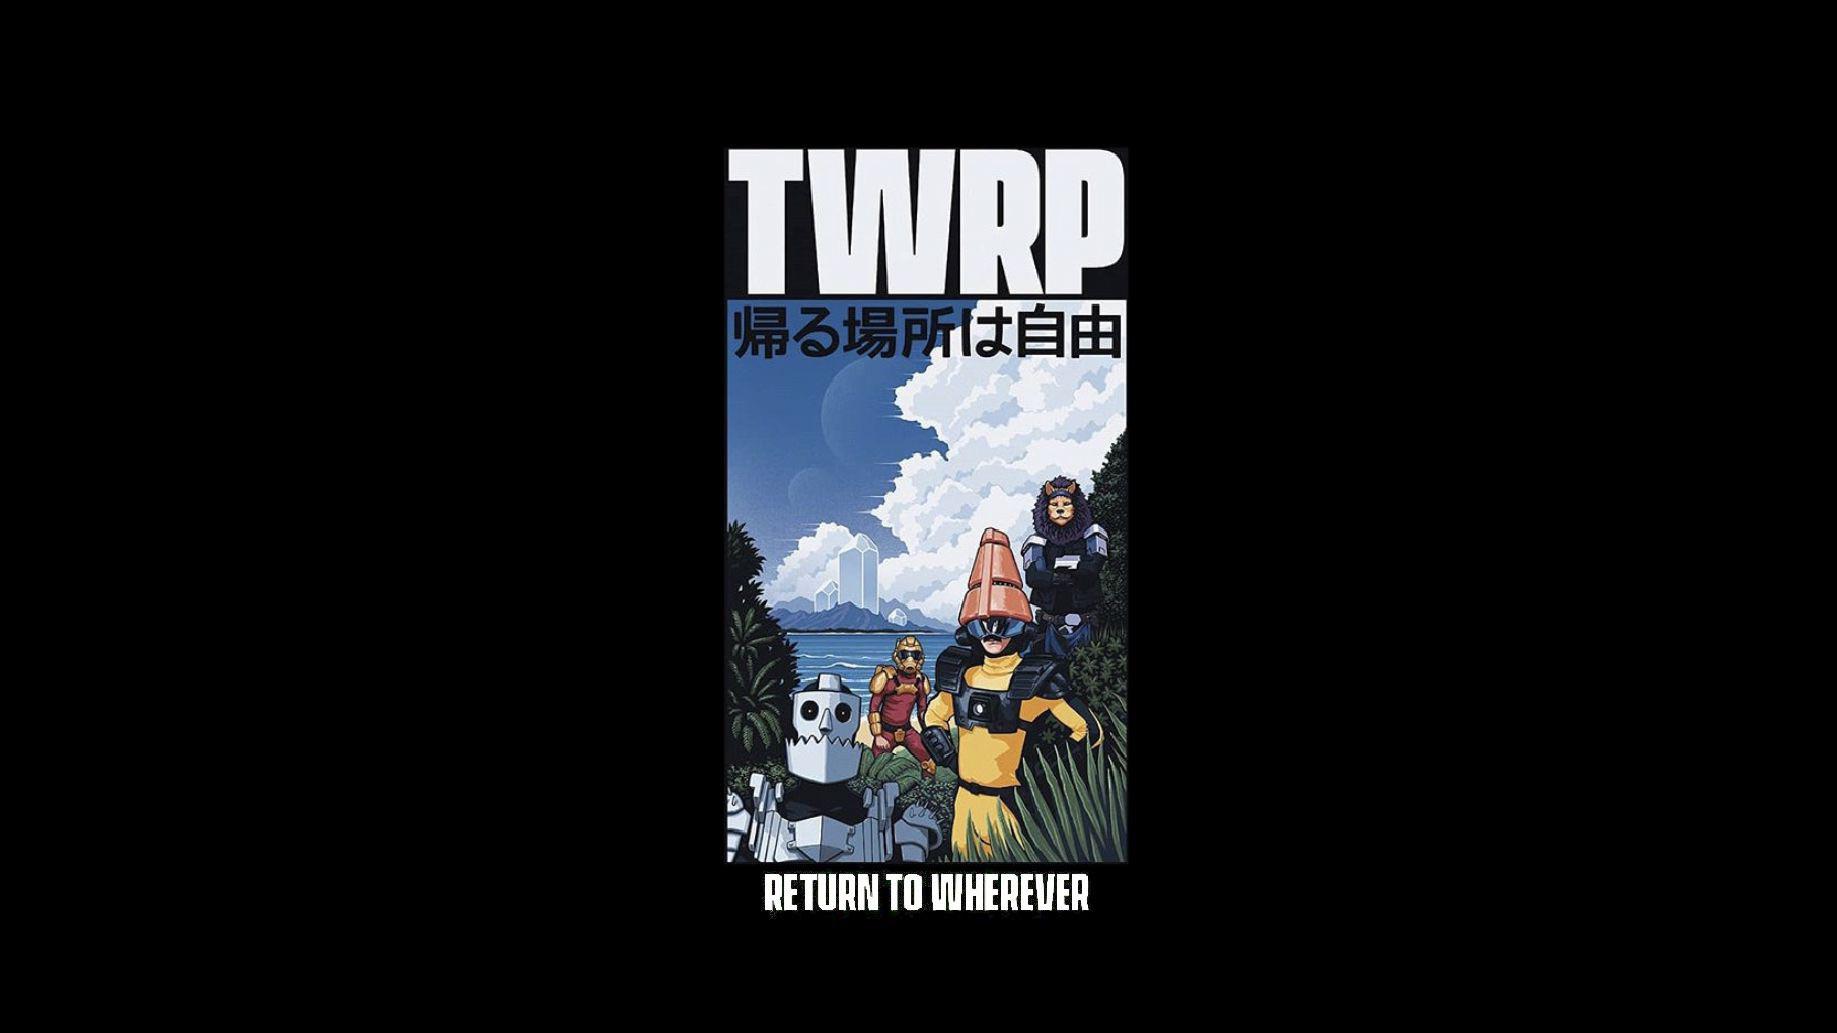 Amoled TWRP PC Wallpaper (requested by user)